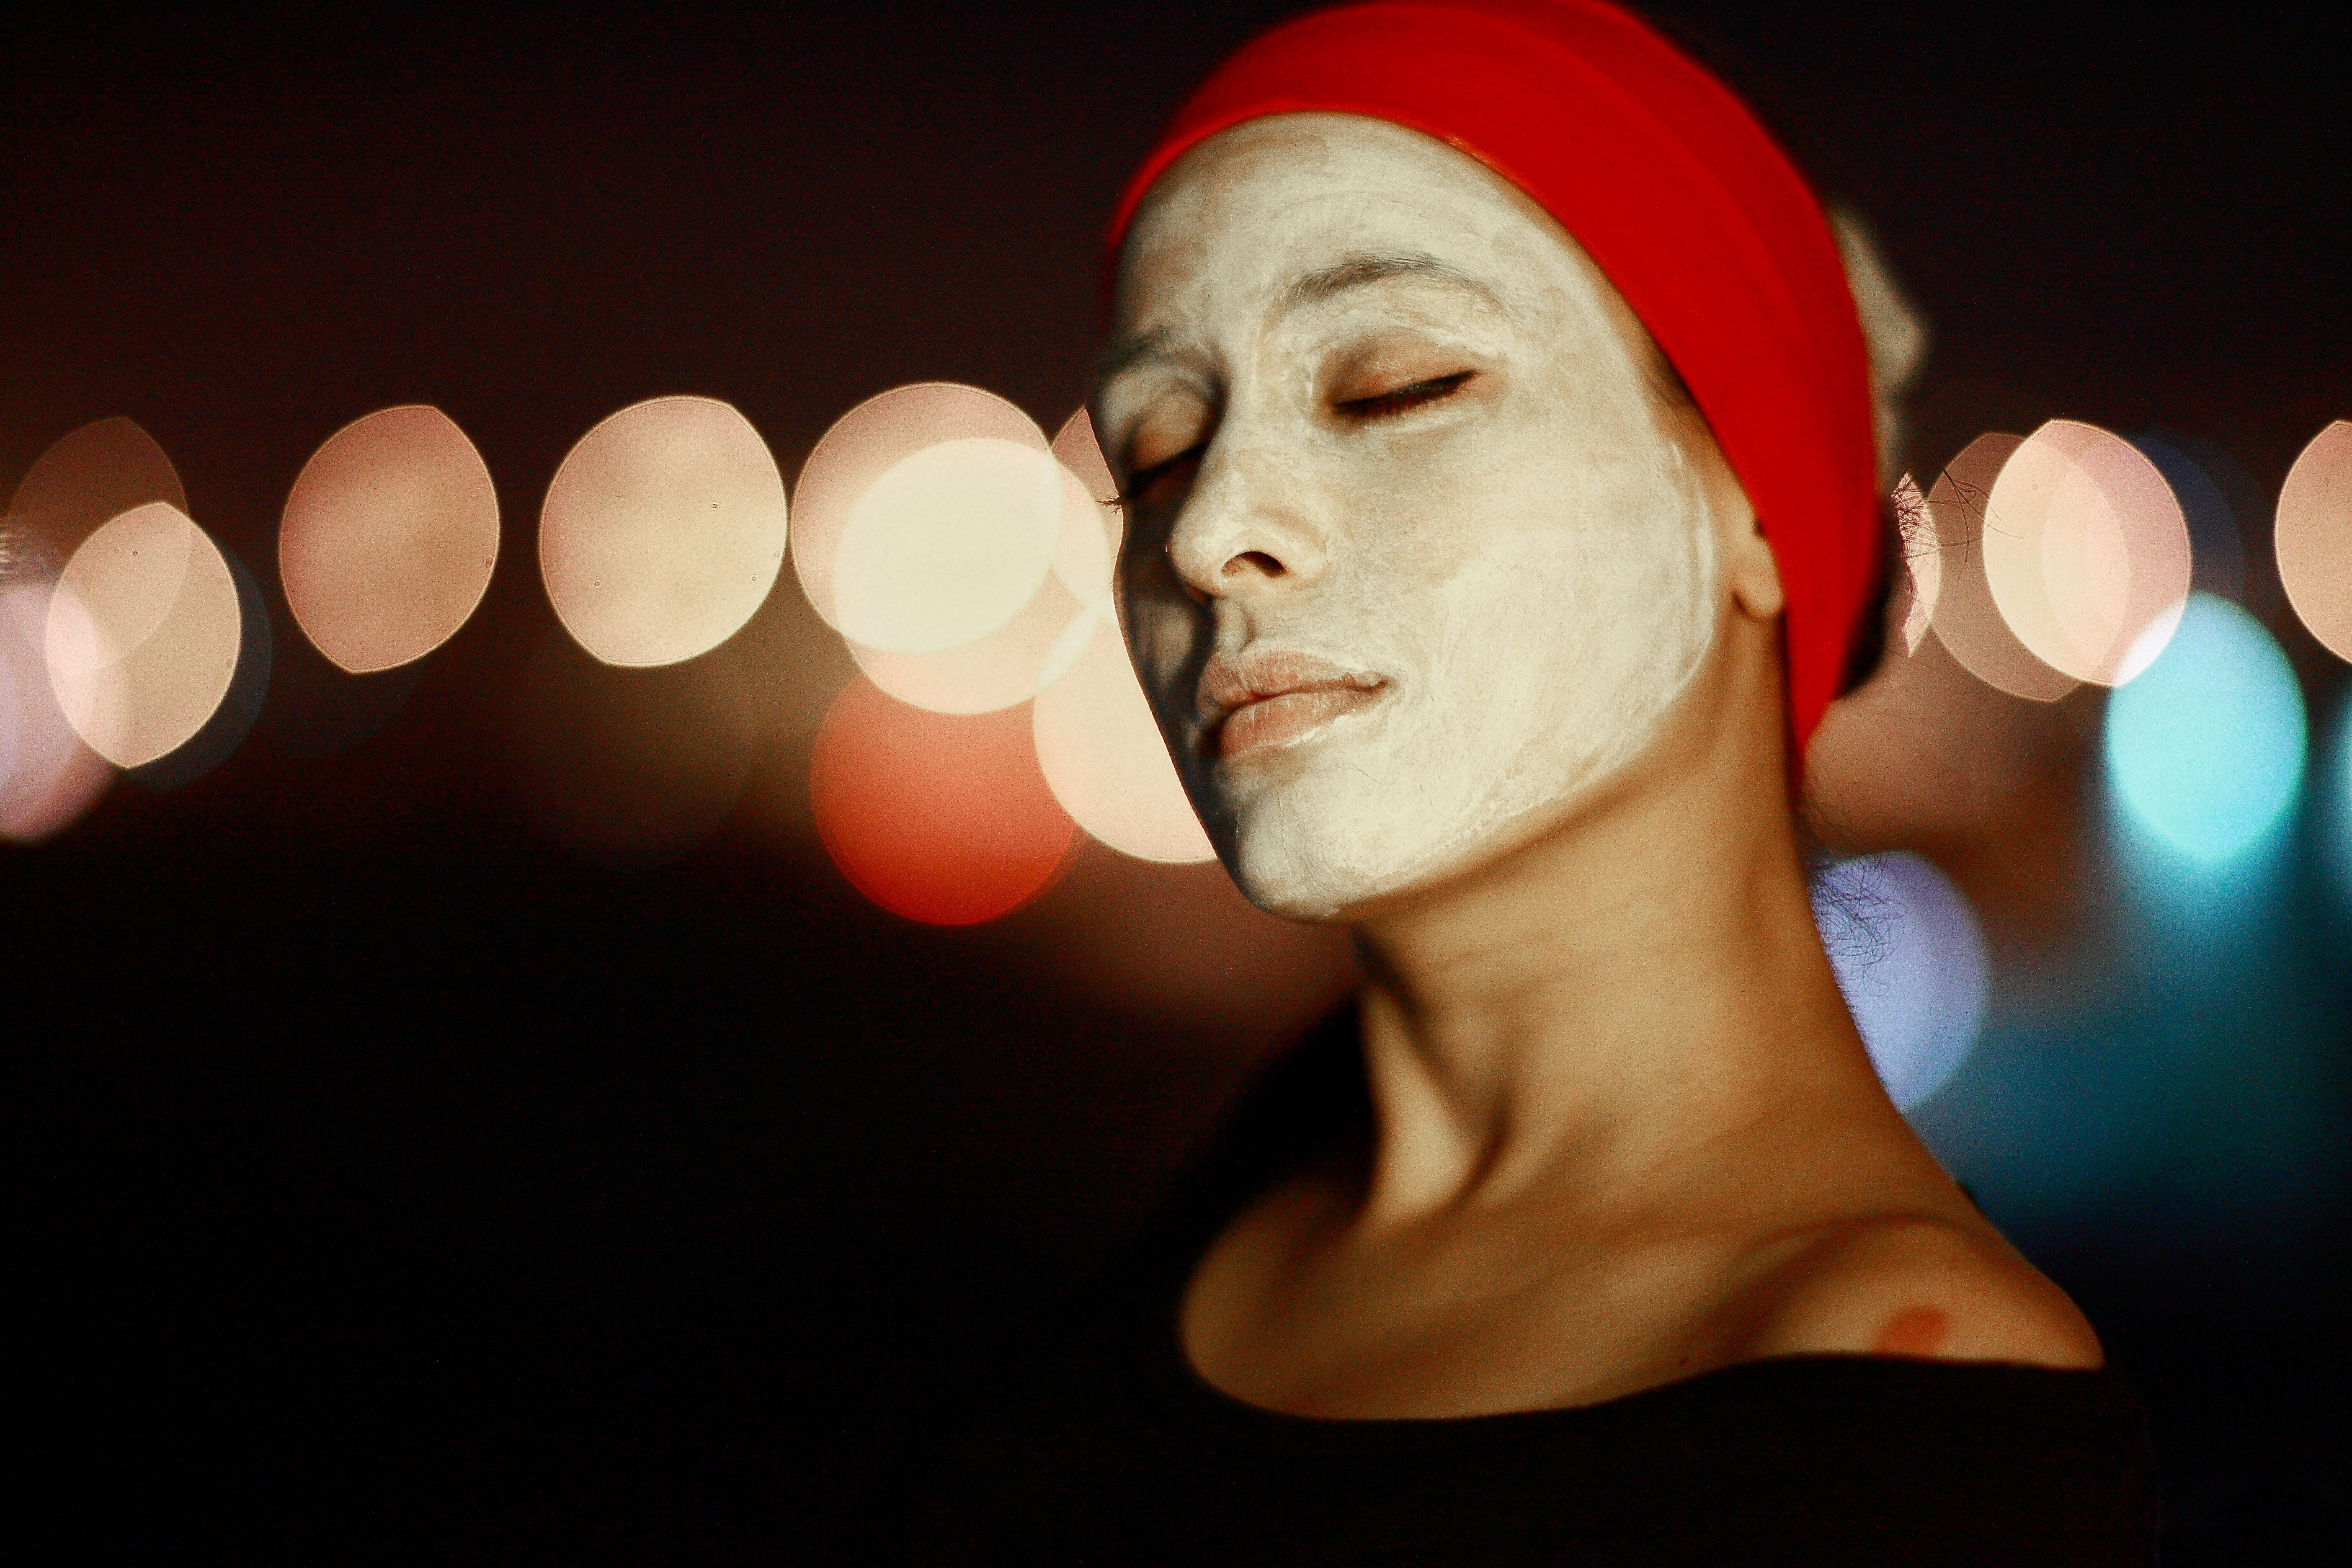 Woman with eyes closed and red headband, enjoying a facial mask